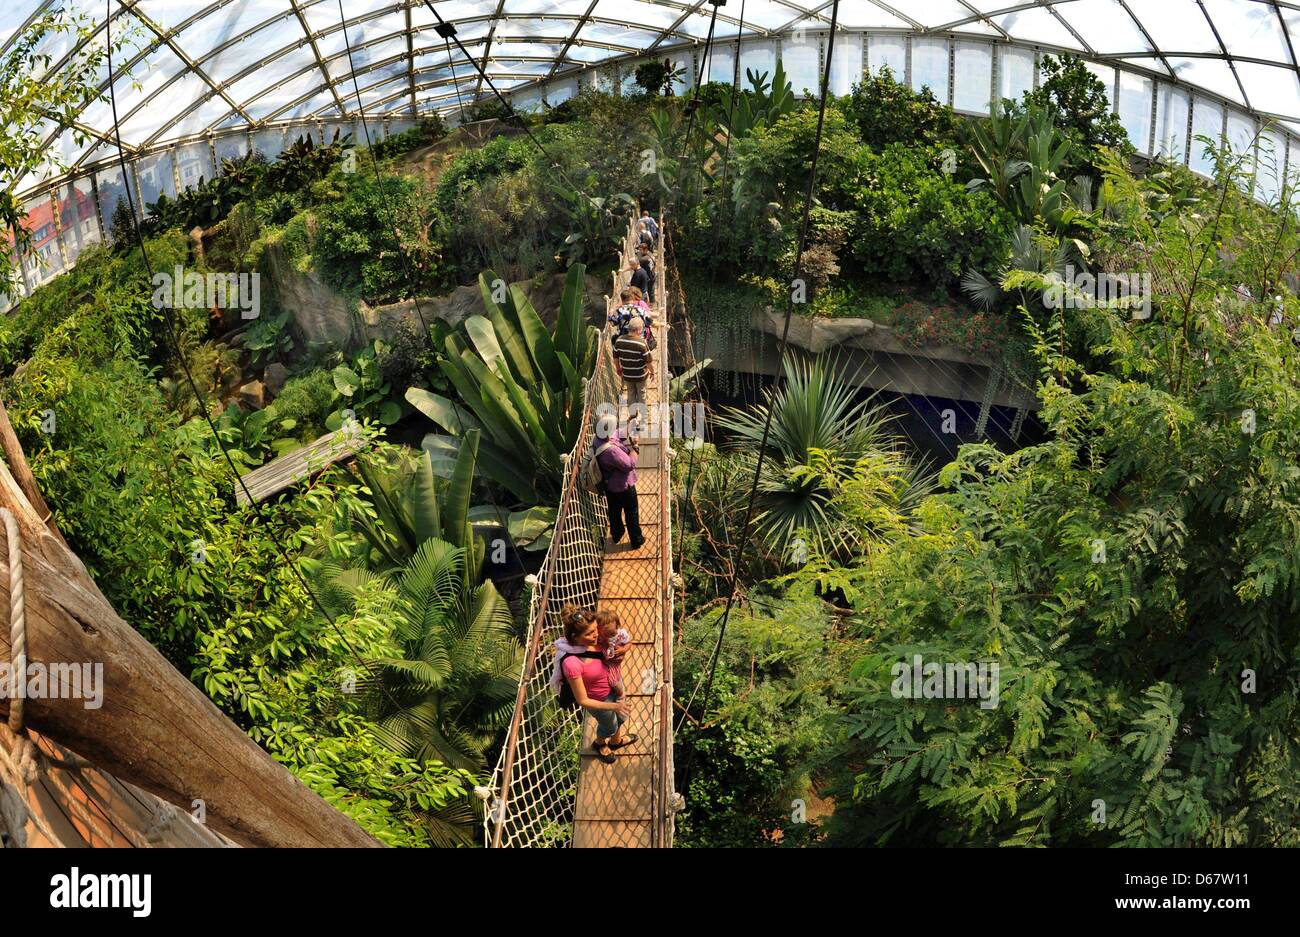 Visitors walk along the treetop path in the gigantic tropical hall 'Gondwanaland' at the Zoo in Leipzig, Germany, 23 June 2012. The 16,500 sqm hall is named for the southern supercontinent Gondwana and will house around 300 animals of 40 speices, as well as 17,000 tropical plants. The biggest tropical hall in Europe was opened one year ago. Photo: Waltraud Grubitzsch Stock Photo